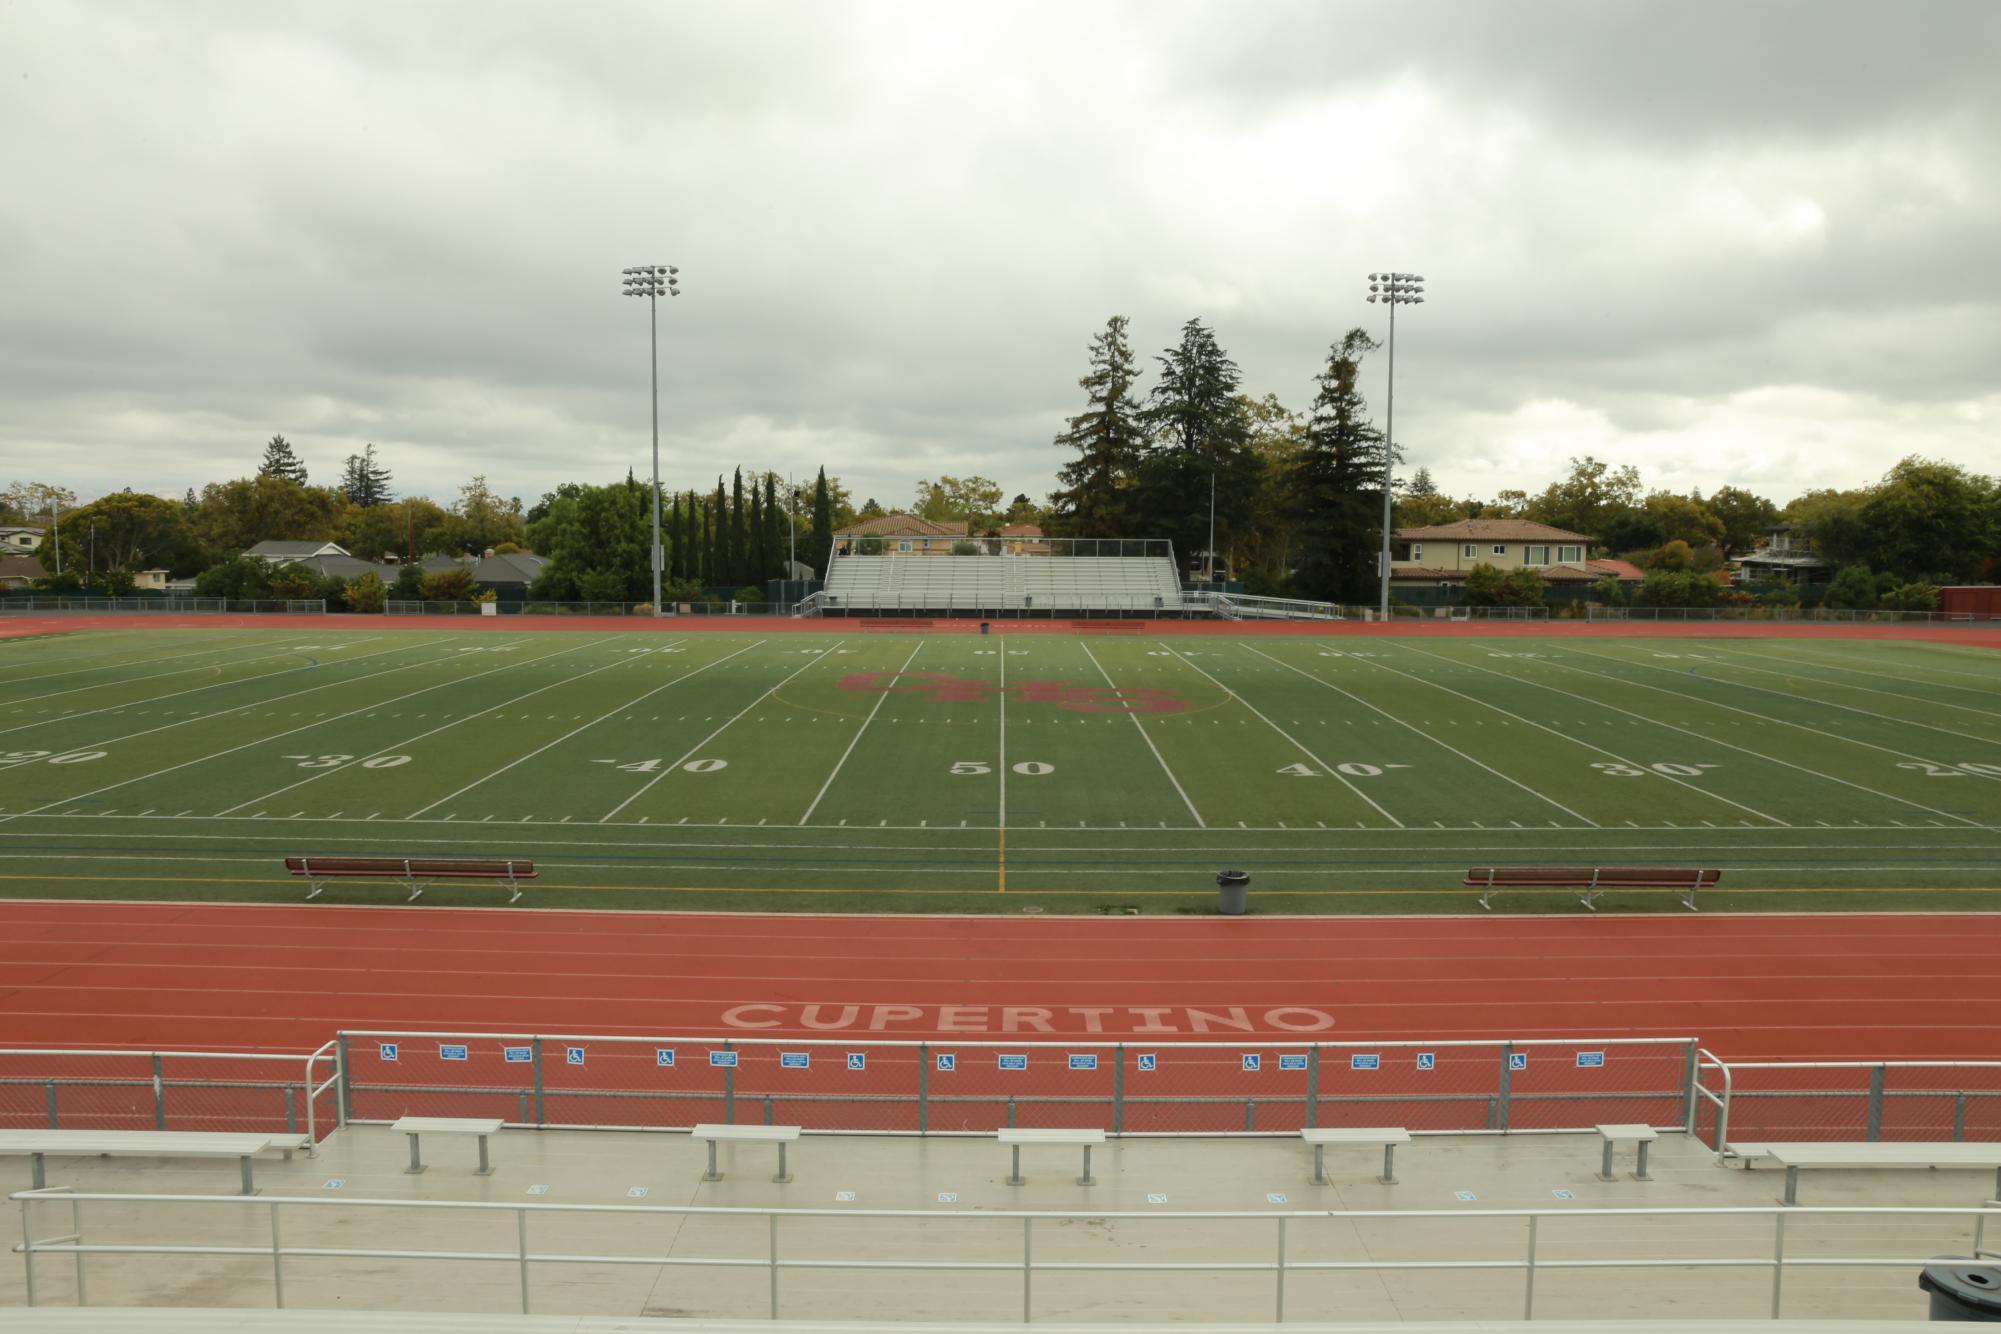 Artificial Turf Fields Raise Injury, Health and Environmental Concerns for FUHSD Schools